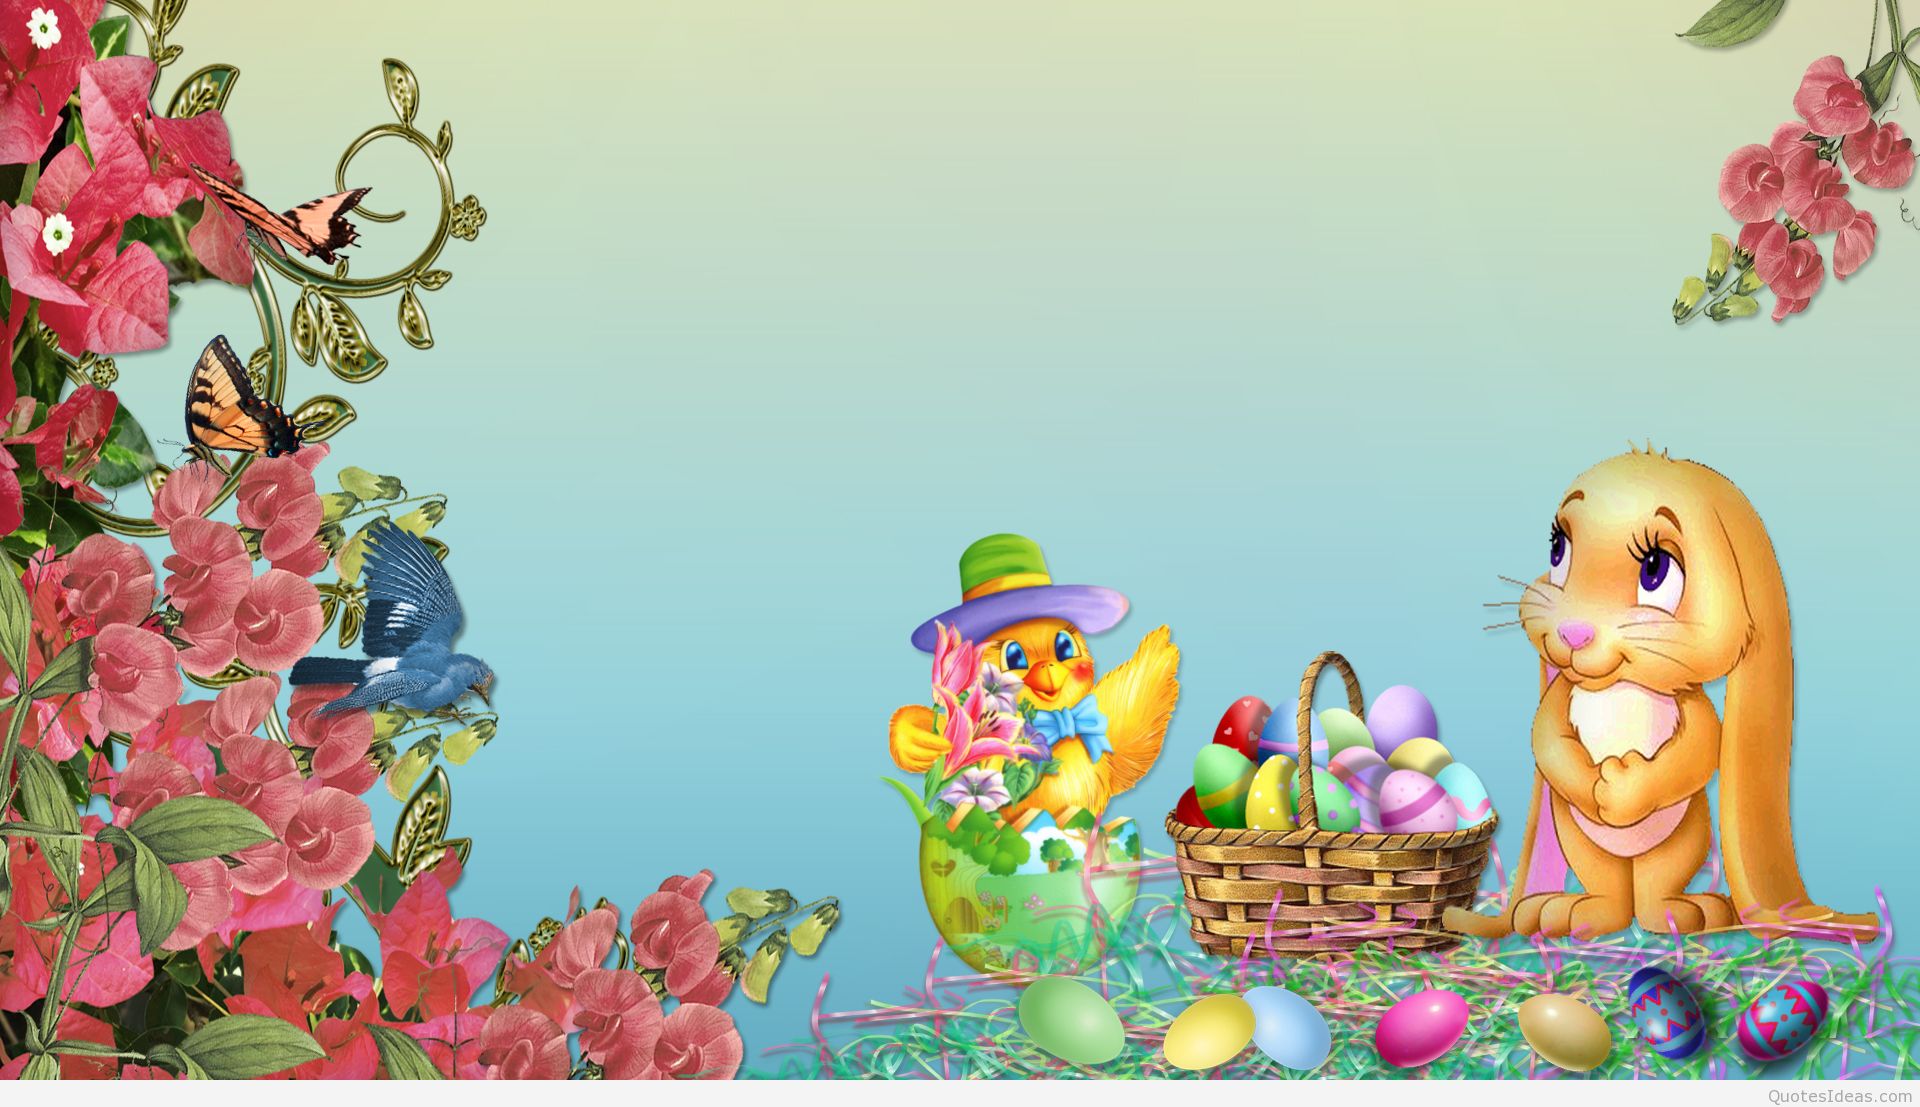 Best Easter Wallpapers Hd - Animated Good Morning Happy Sunday - 1920x1107  Wallpaper 